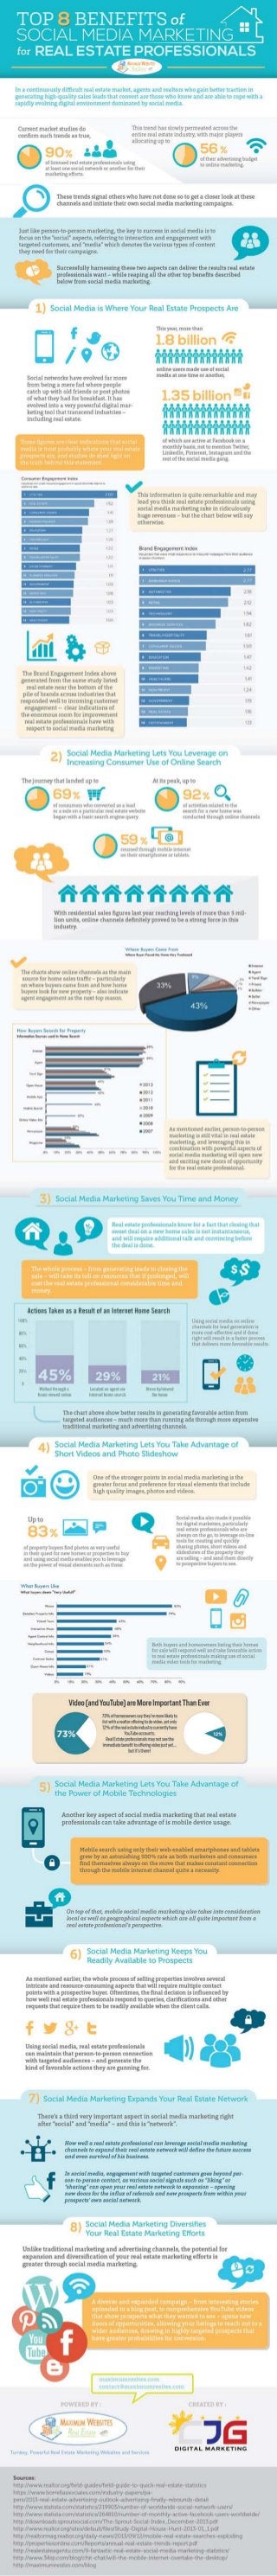 Top 8 Benefits of Social Media Marketing for Real Estate Professionals (Infographic)